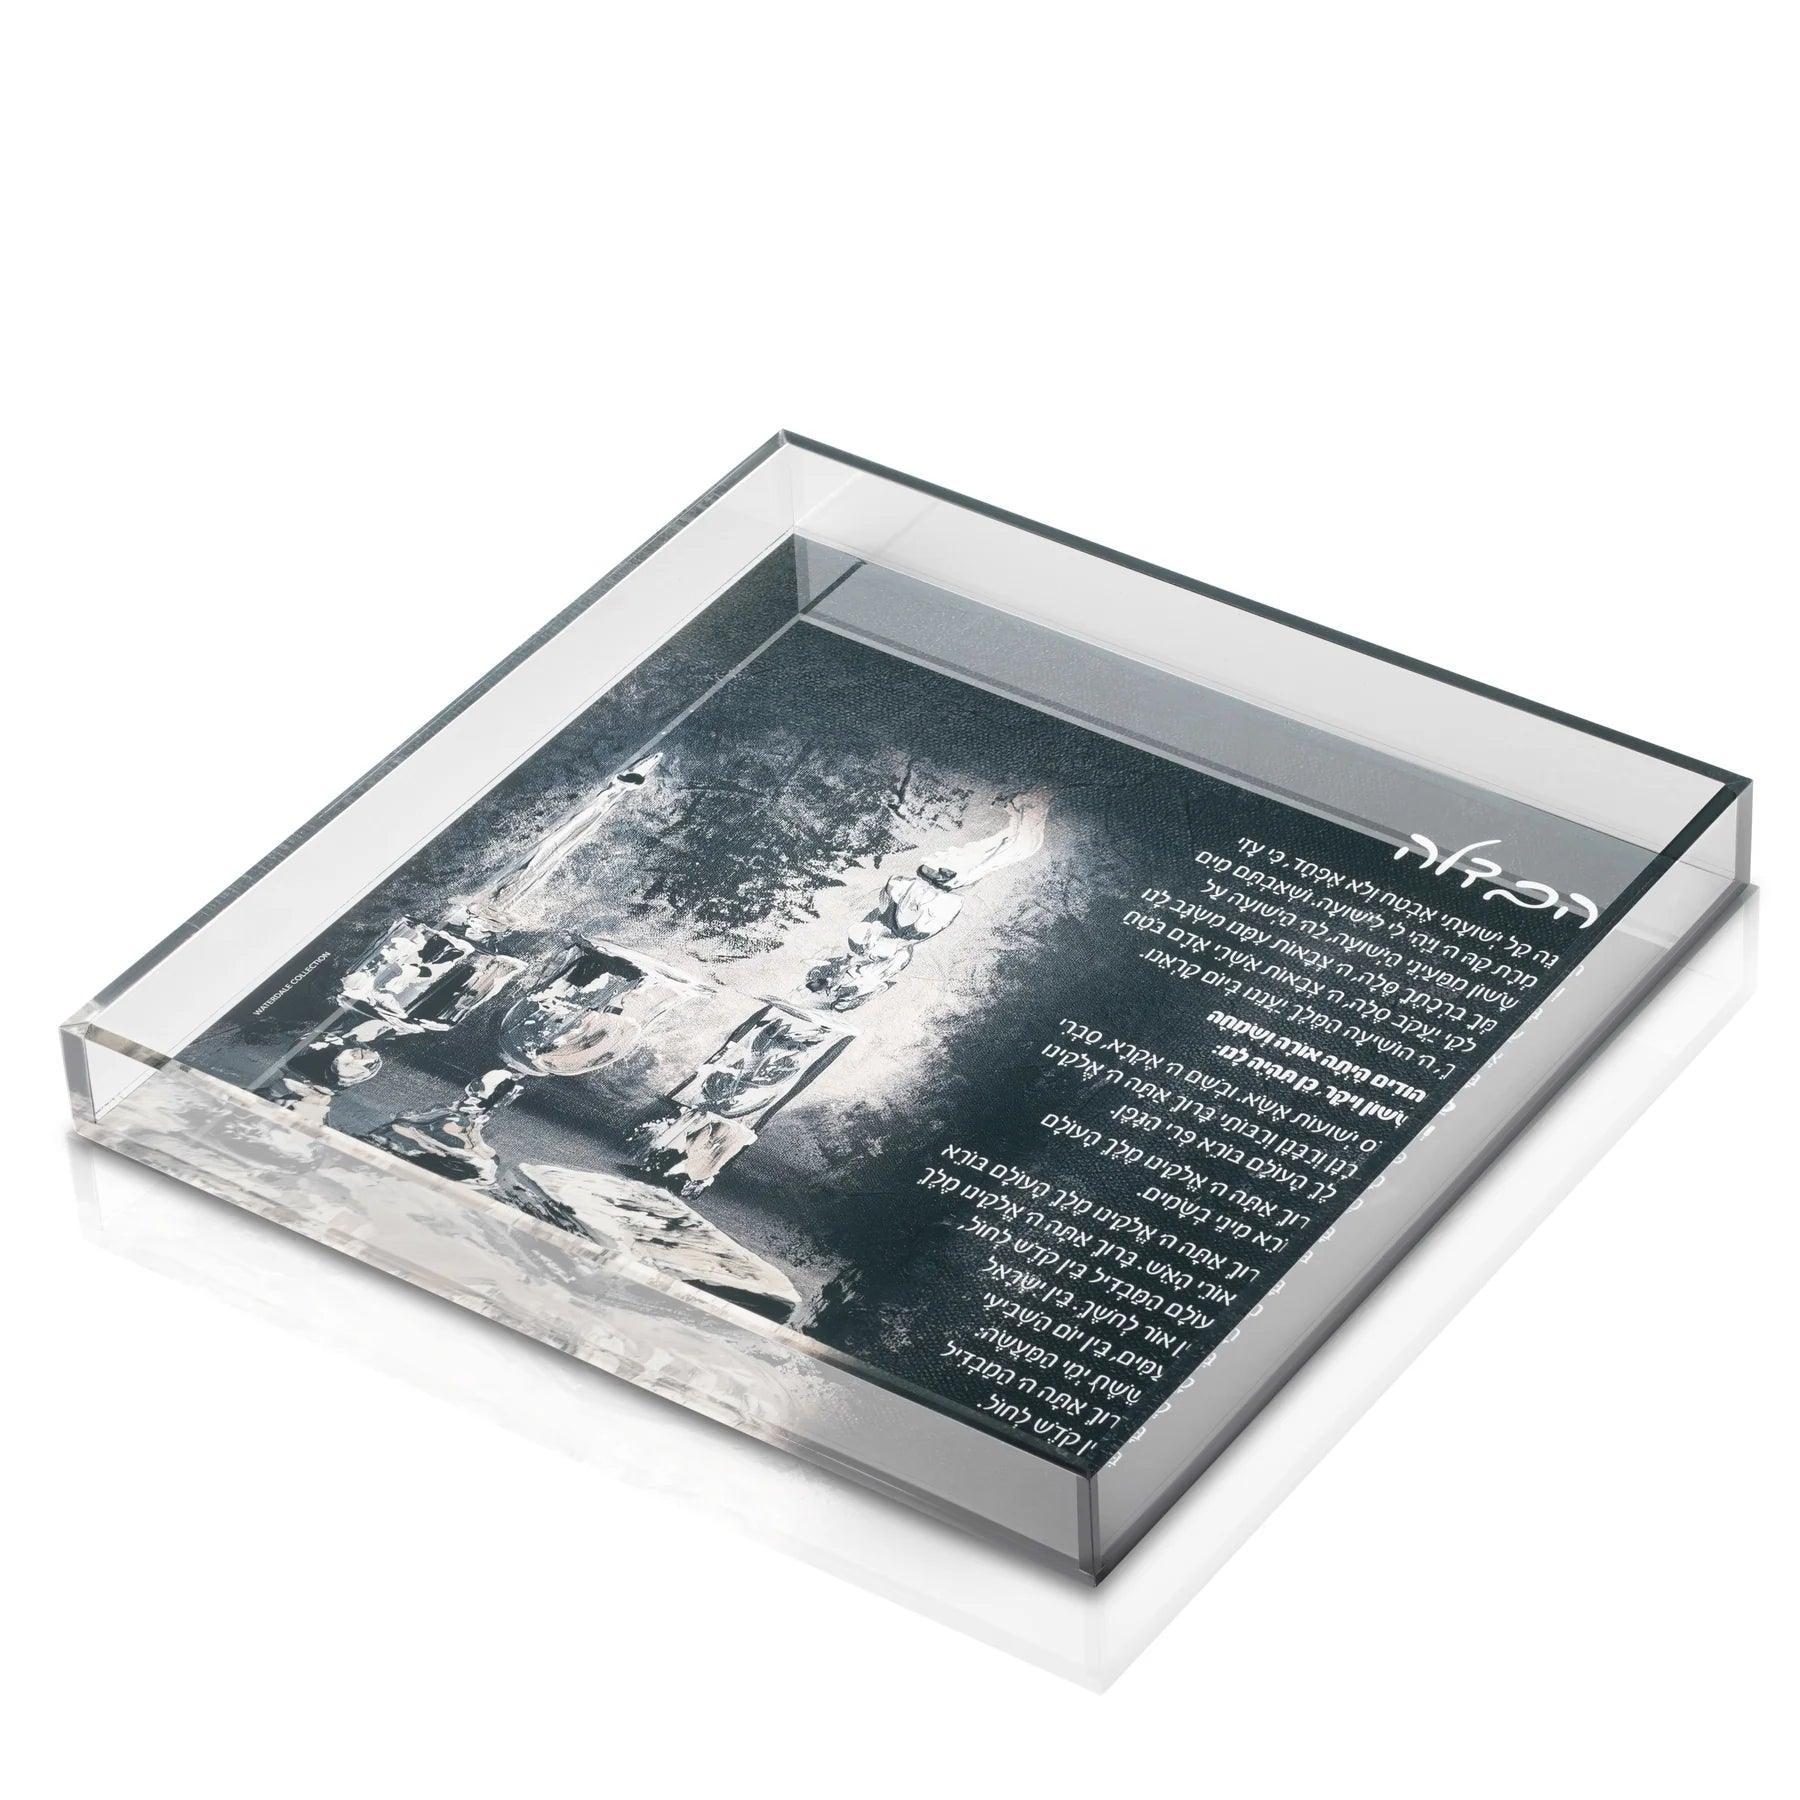 Lucite Matches Box-Shabbos Text